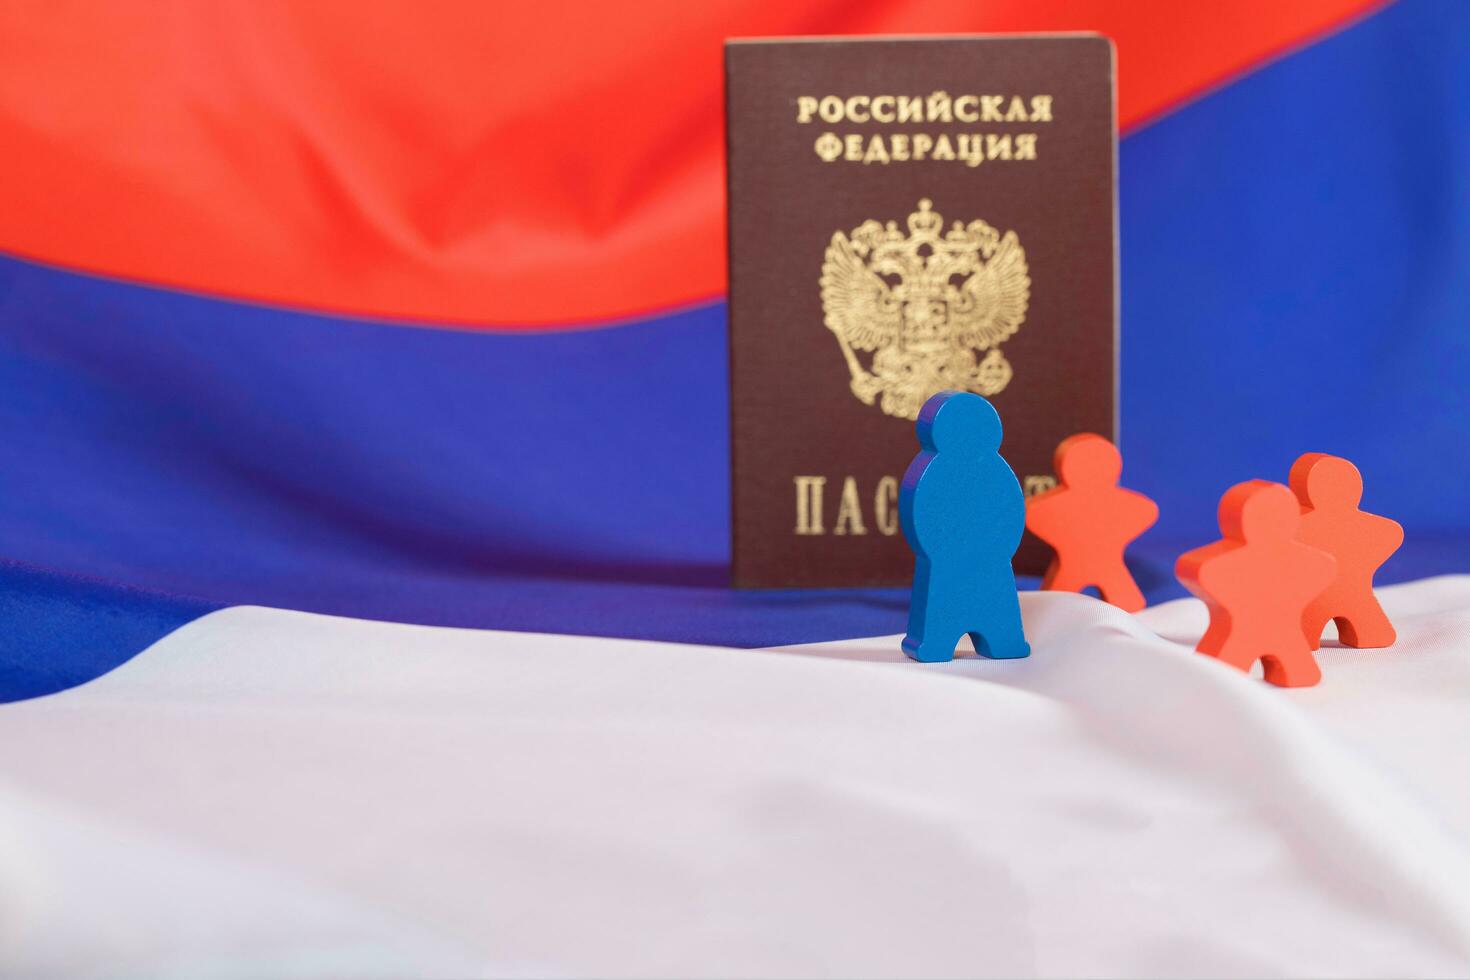 Wooden figures on Russian flag. photo